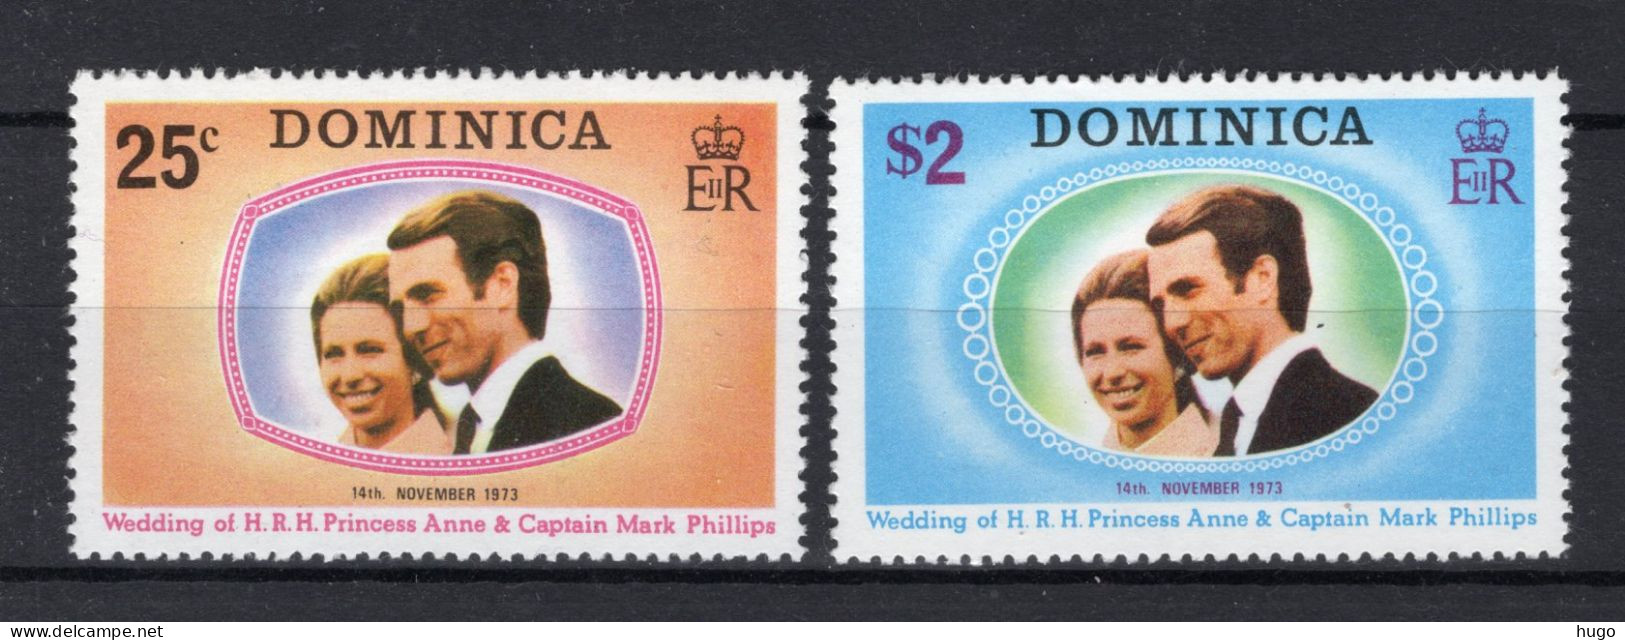 DOMINICA Yt. 366/367 MNH 1973 - Dominica (...-1978)